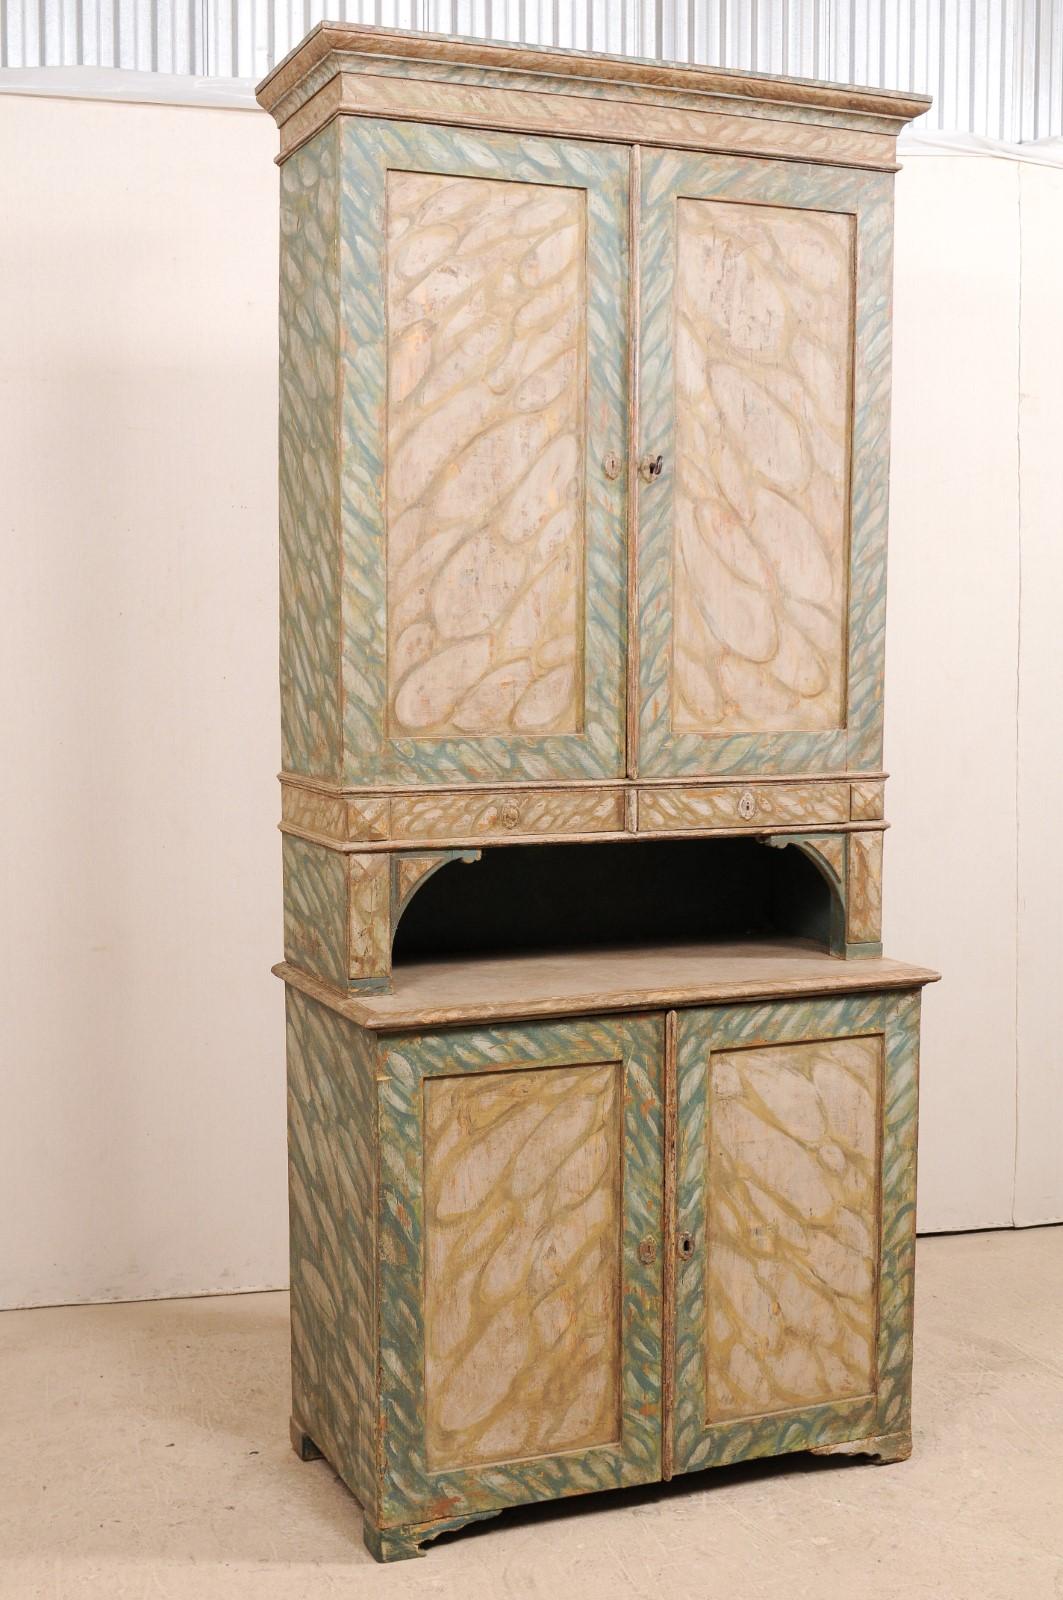 Carved Swedish Painted Wood Two-Piece Cupboard, circa 1830-1850